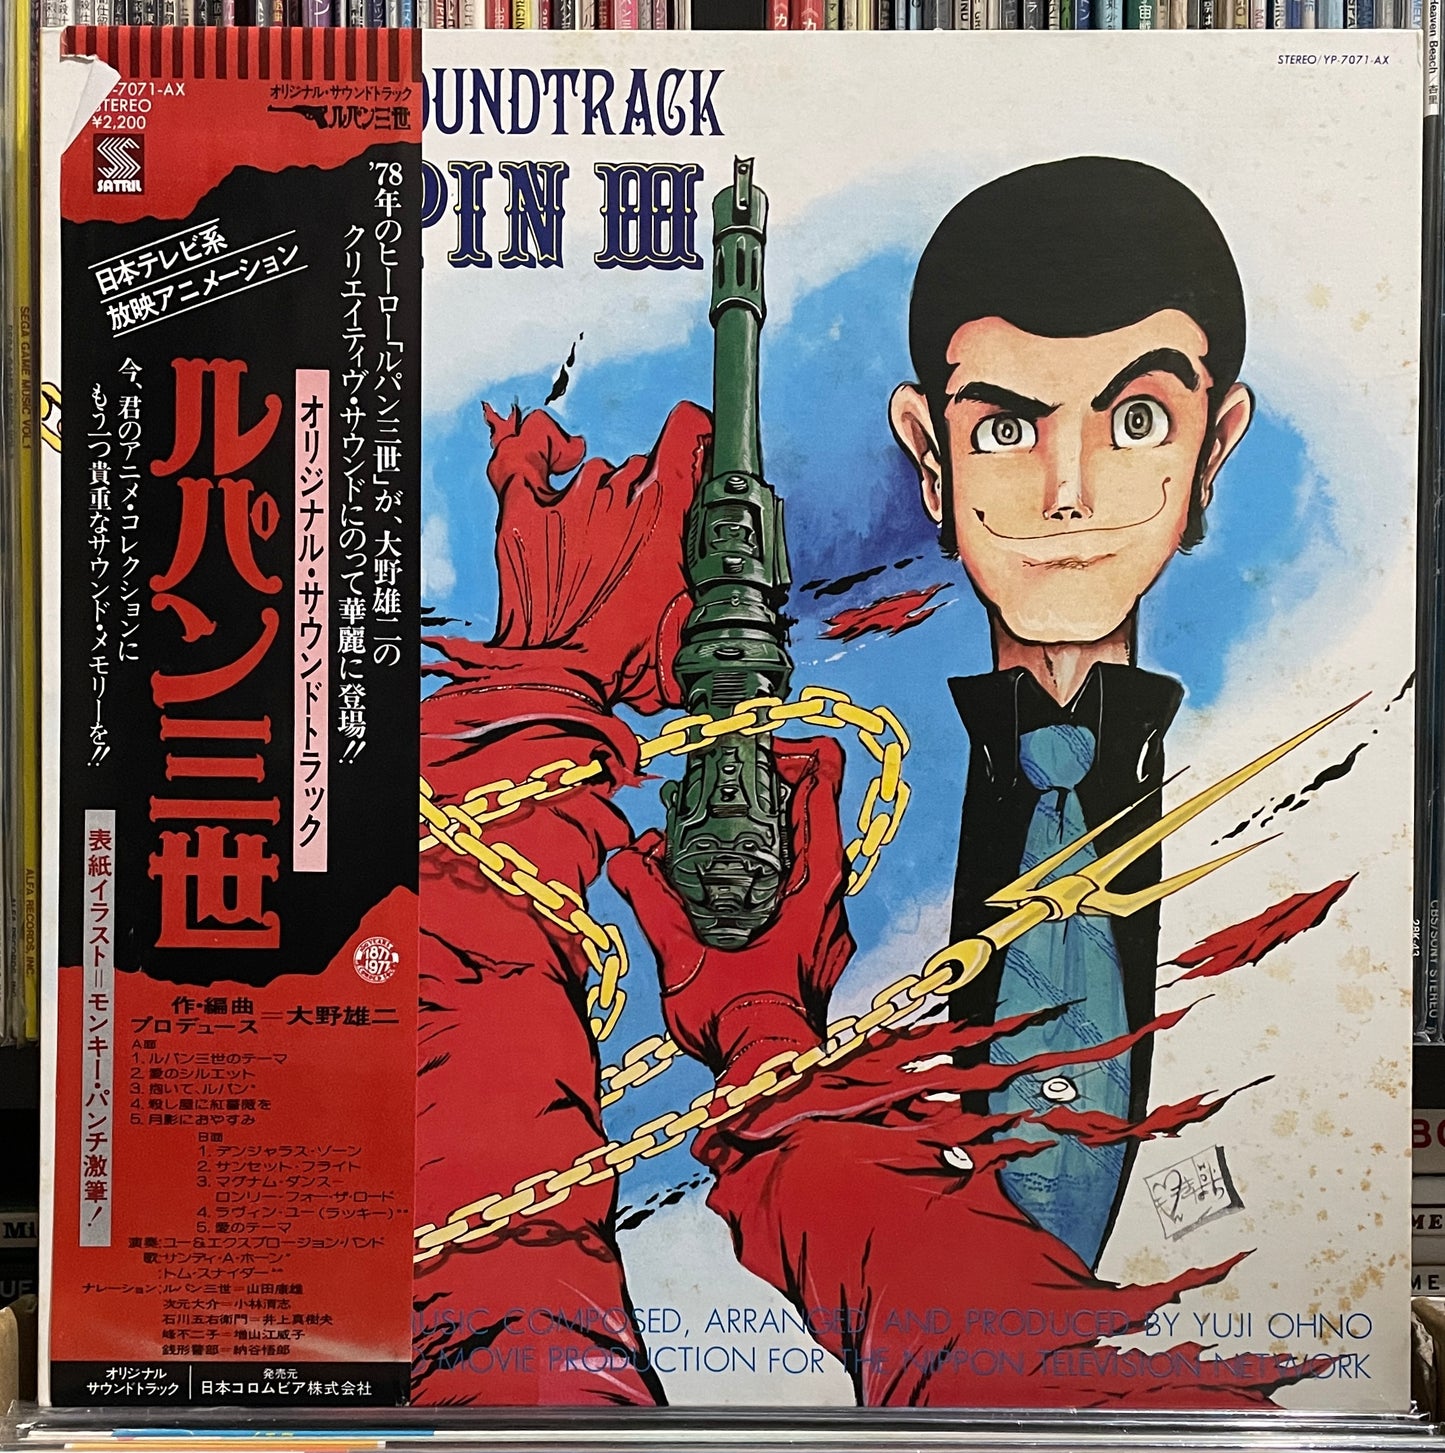 Yuji Ohno (You & The Explosion Band) “Lupin The 3rd” OST (1978)